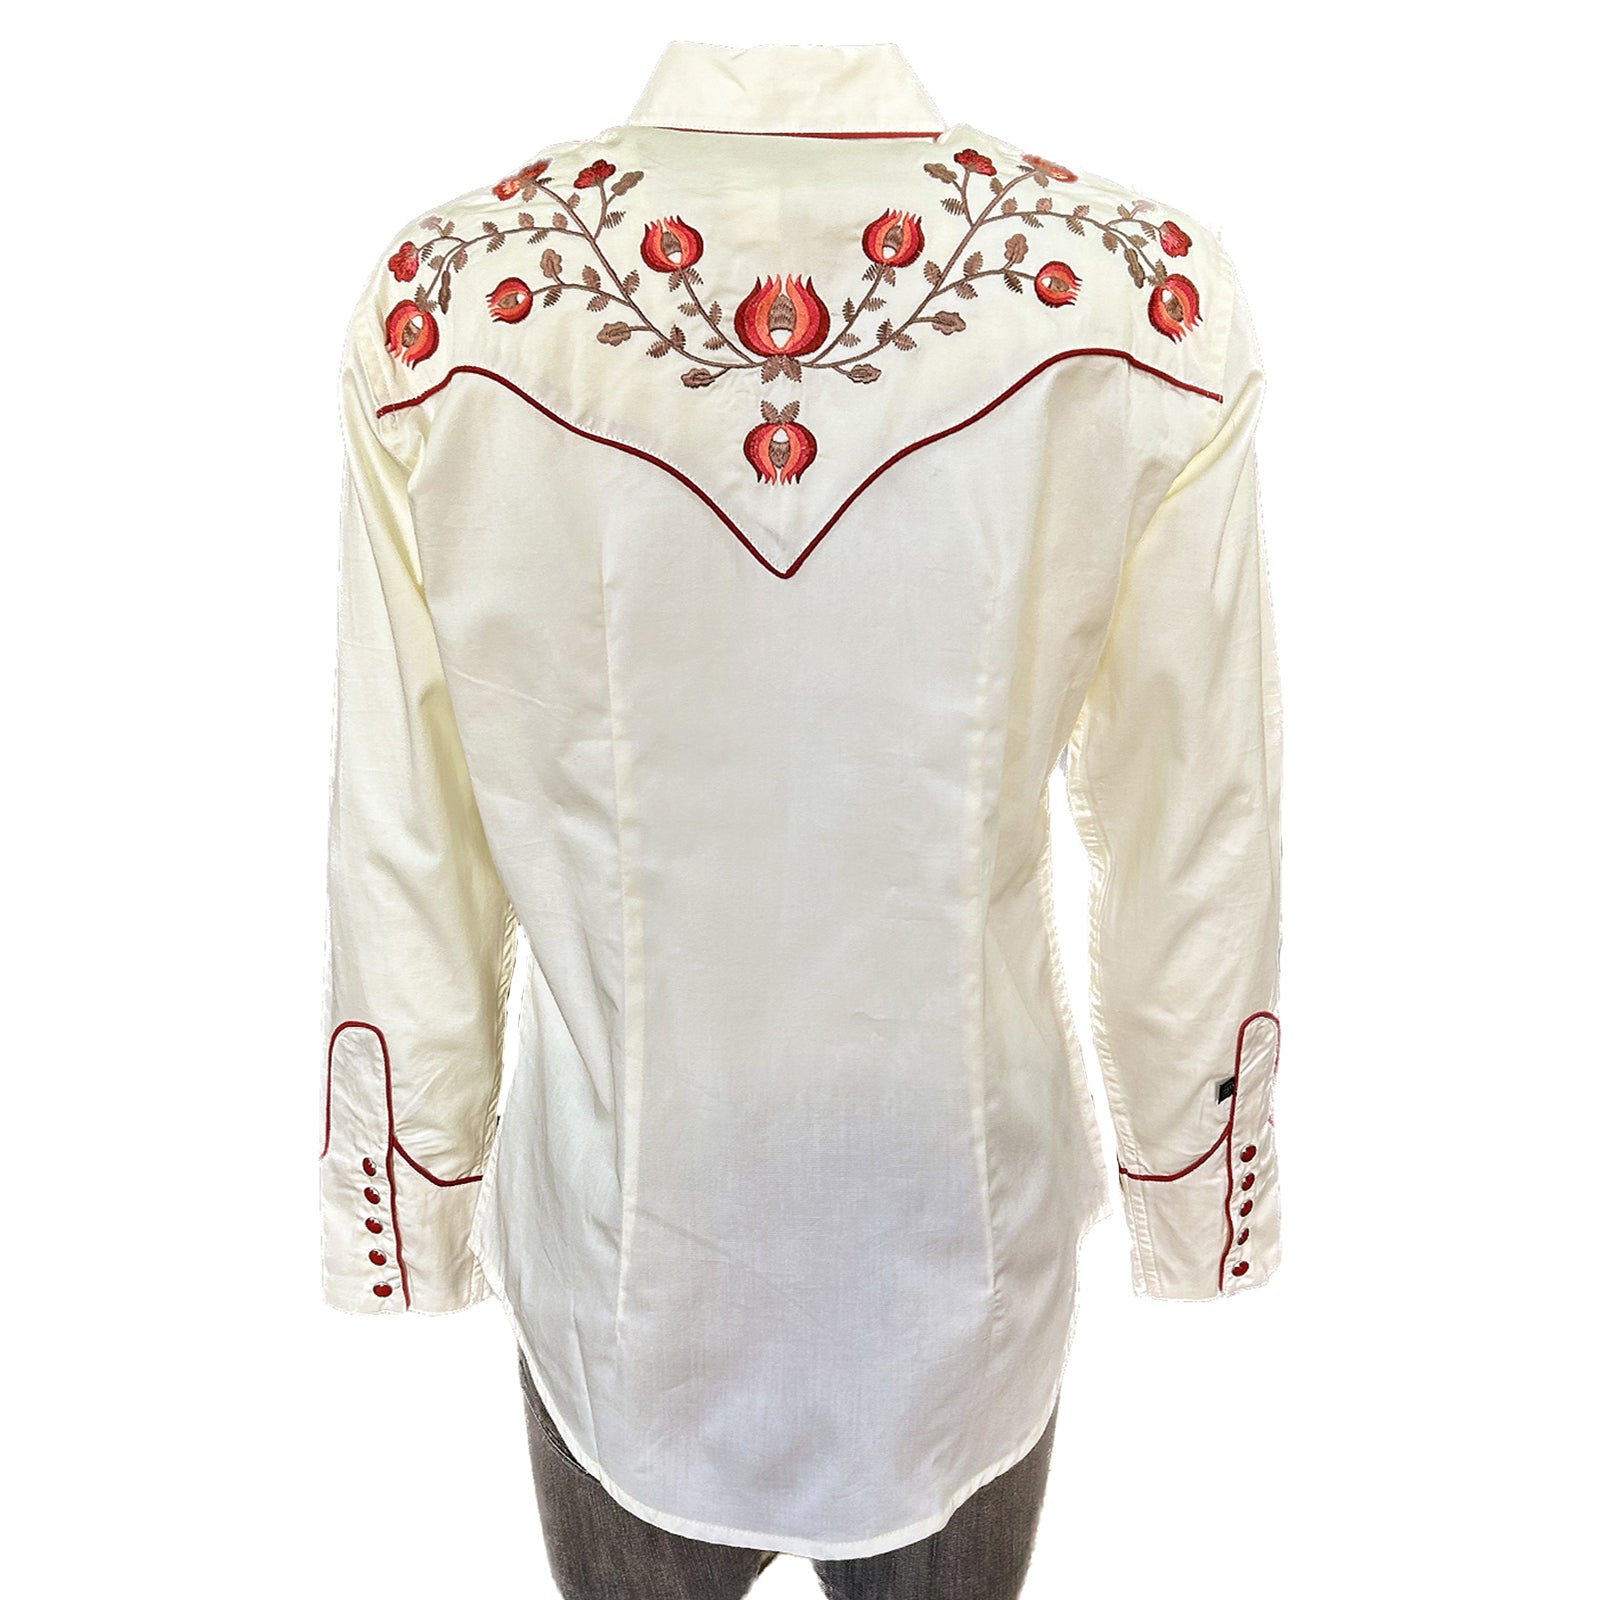 The Floral Embroidered Shirt - S – Nineteen Seventy